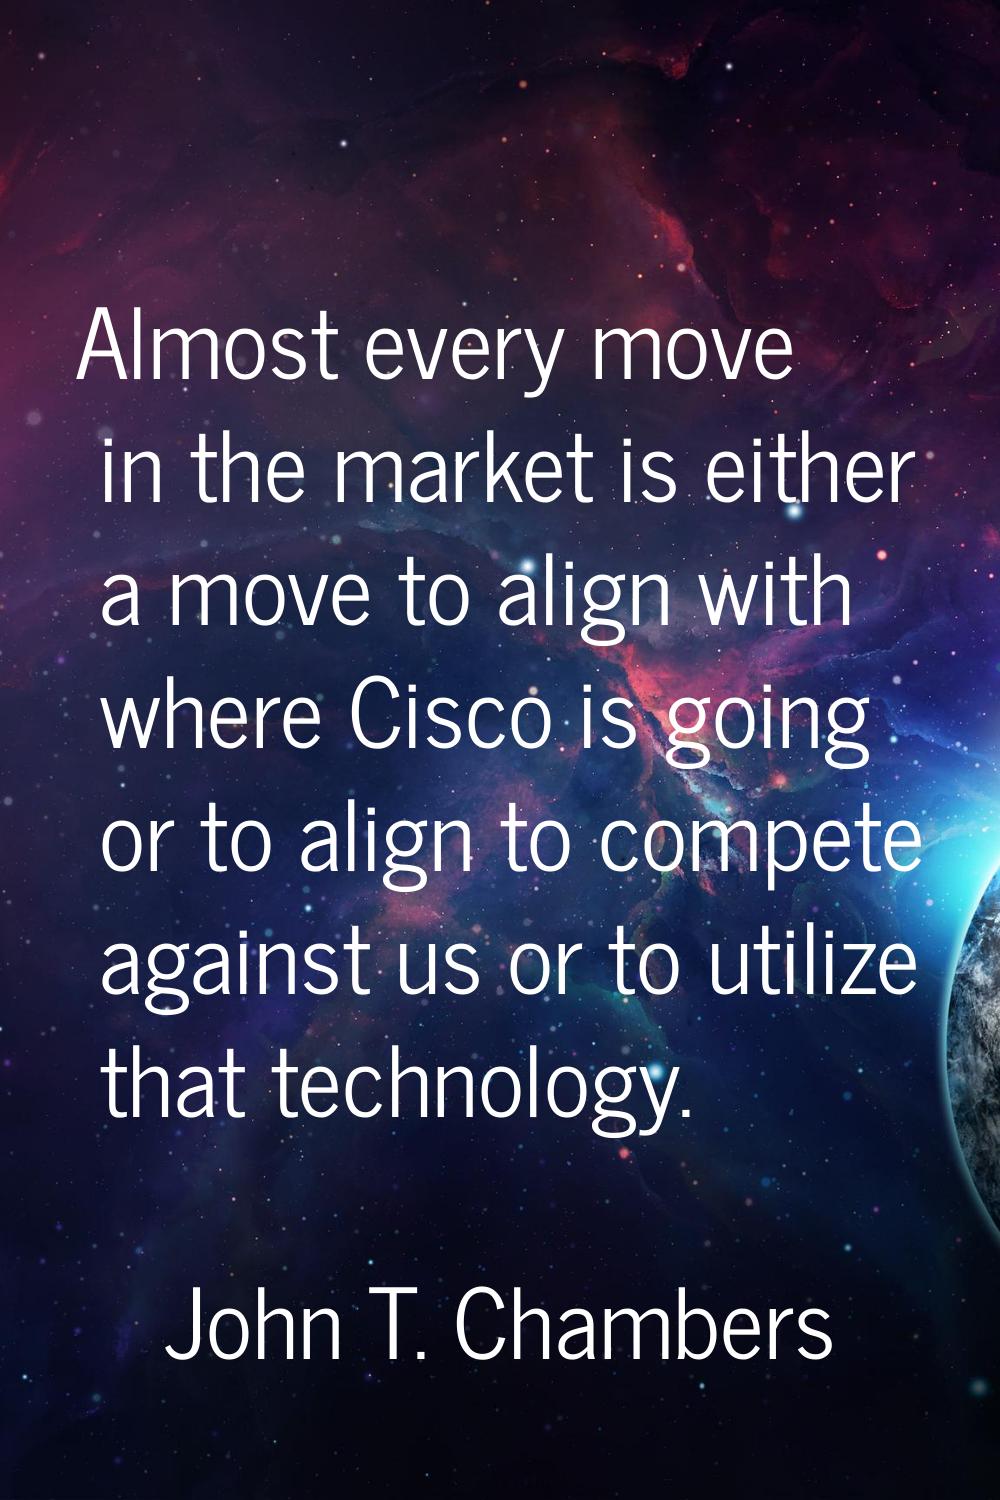 Almost every move in the market is either a move to align with where Cisco is going or to align to 